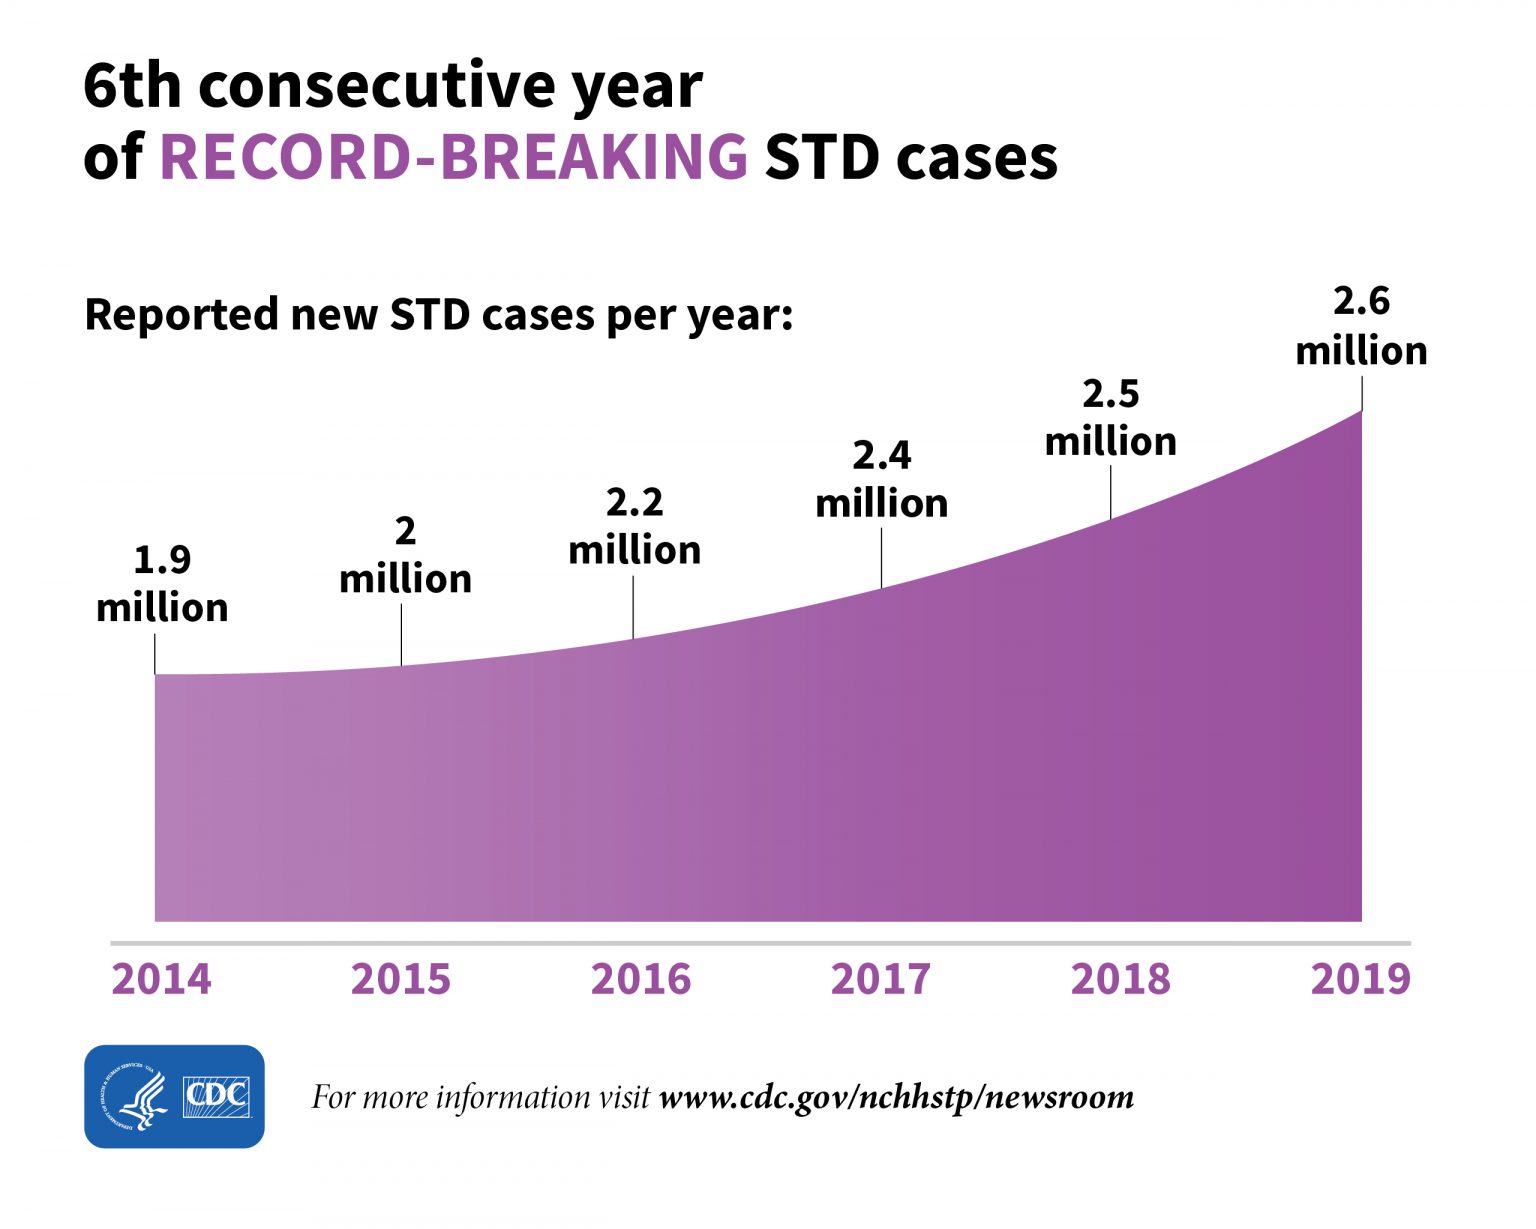 Concerns for growing STI rates with barriers on Sexual Health